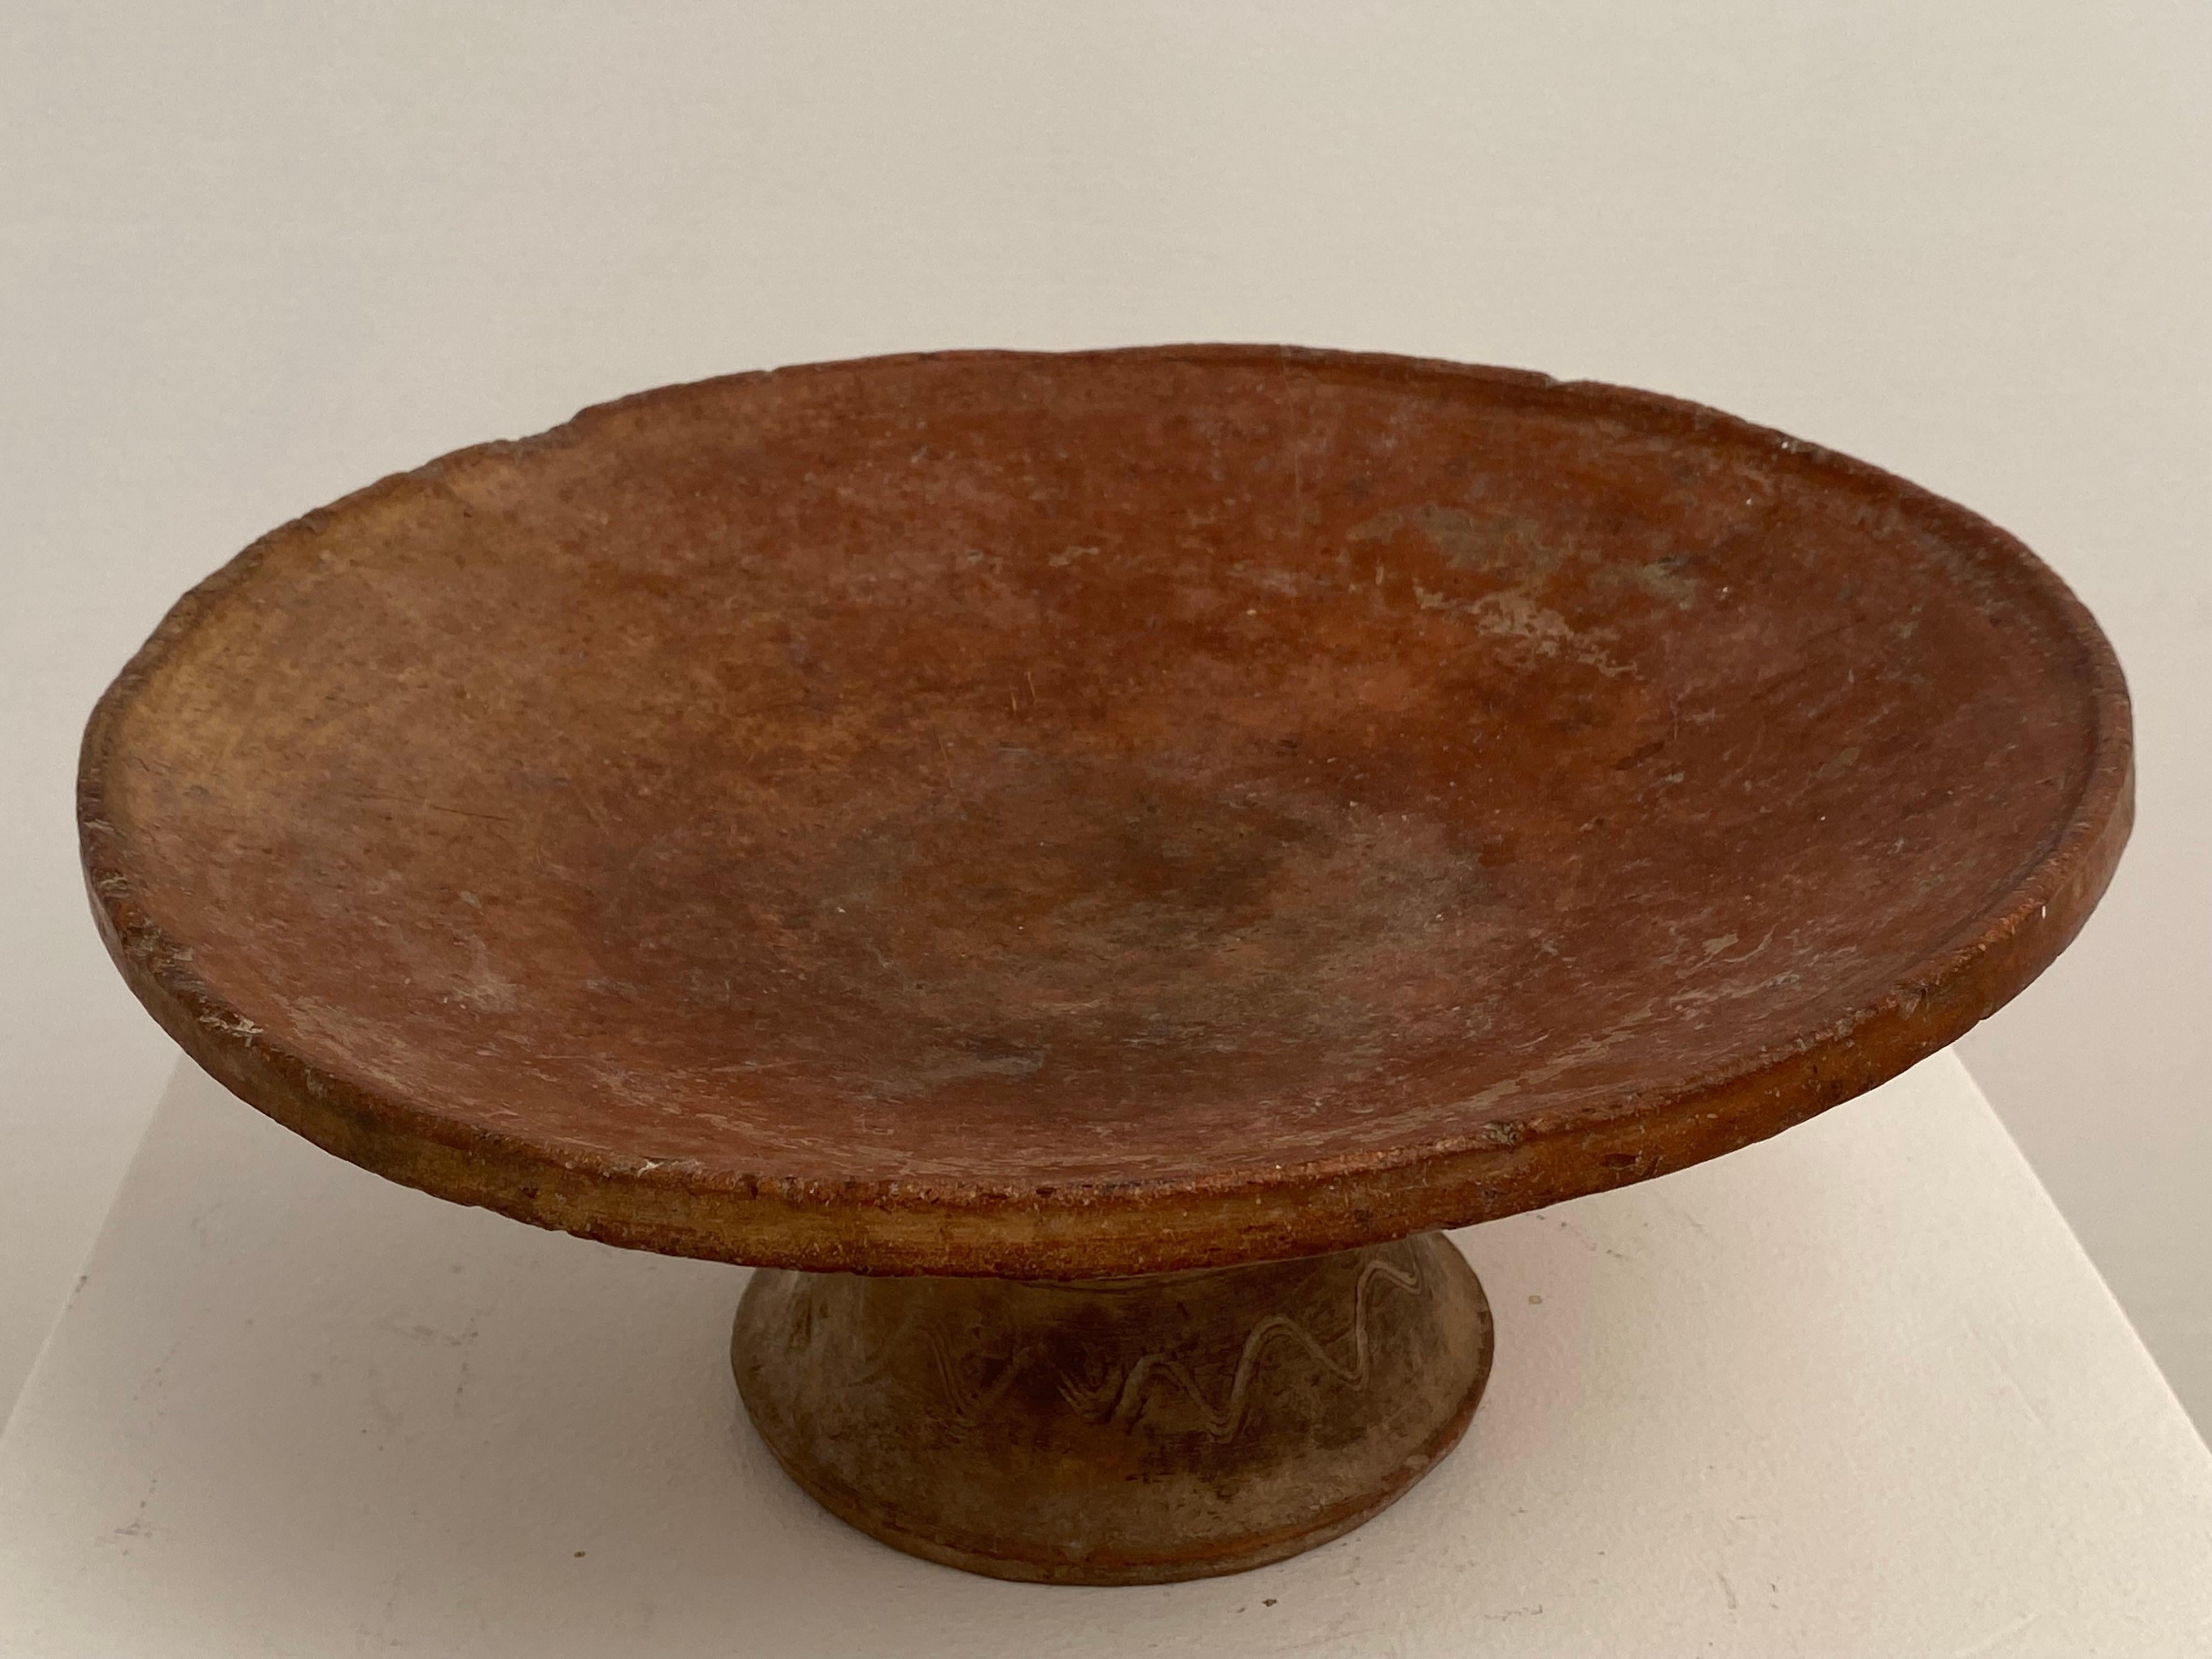 Antique Berber Terracotta Bowl on a central foot In Excellent Condition For Sale In Schellebelle, BE